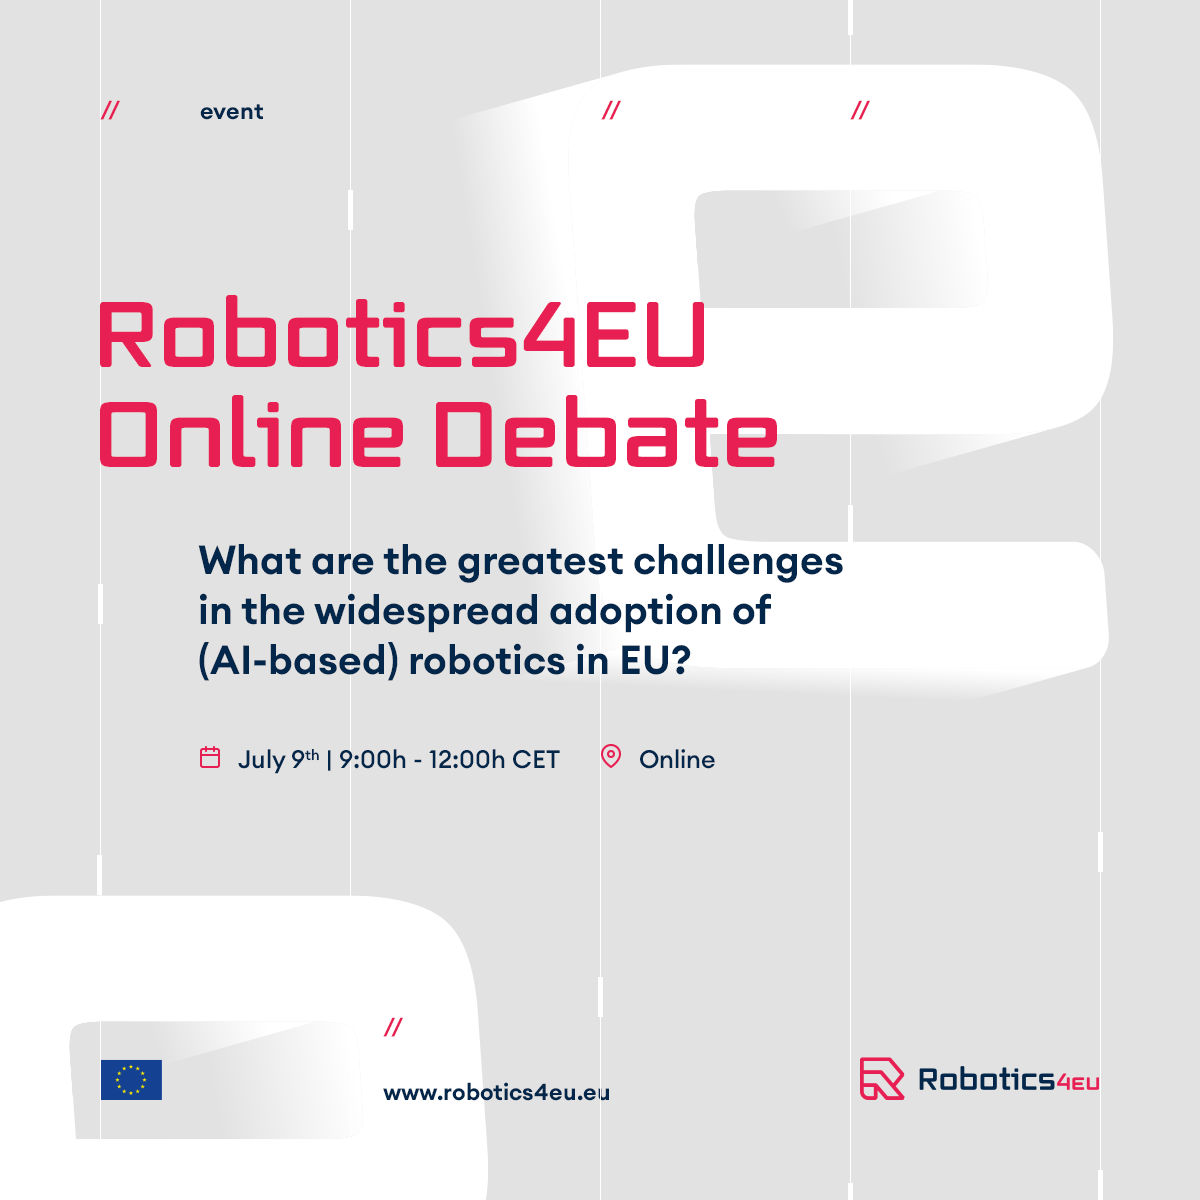 Online Debate | What are the greatest challenges in the widespread adoption of (AI-based) robotics in EU?